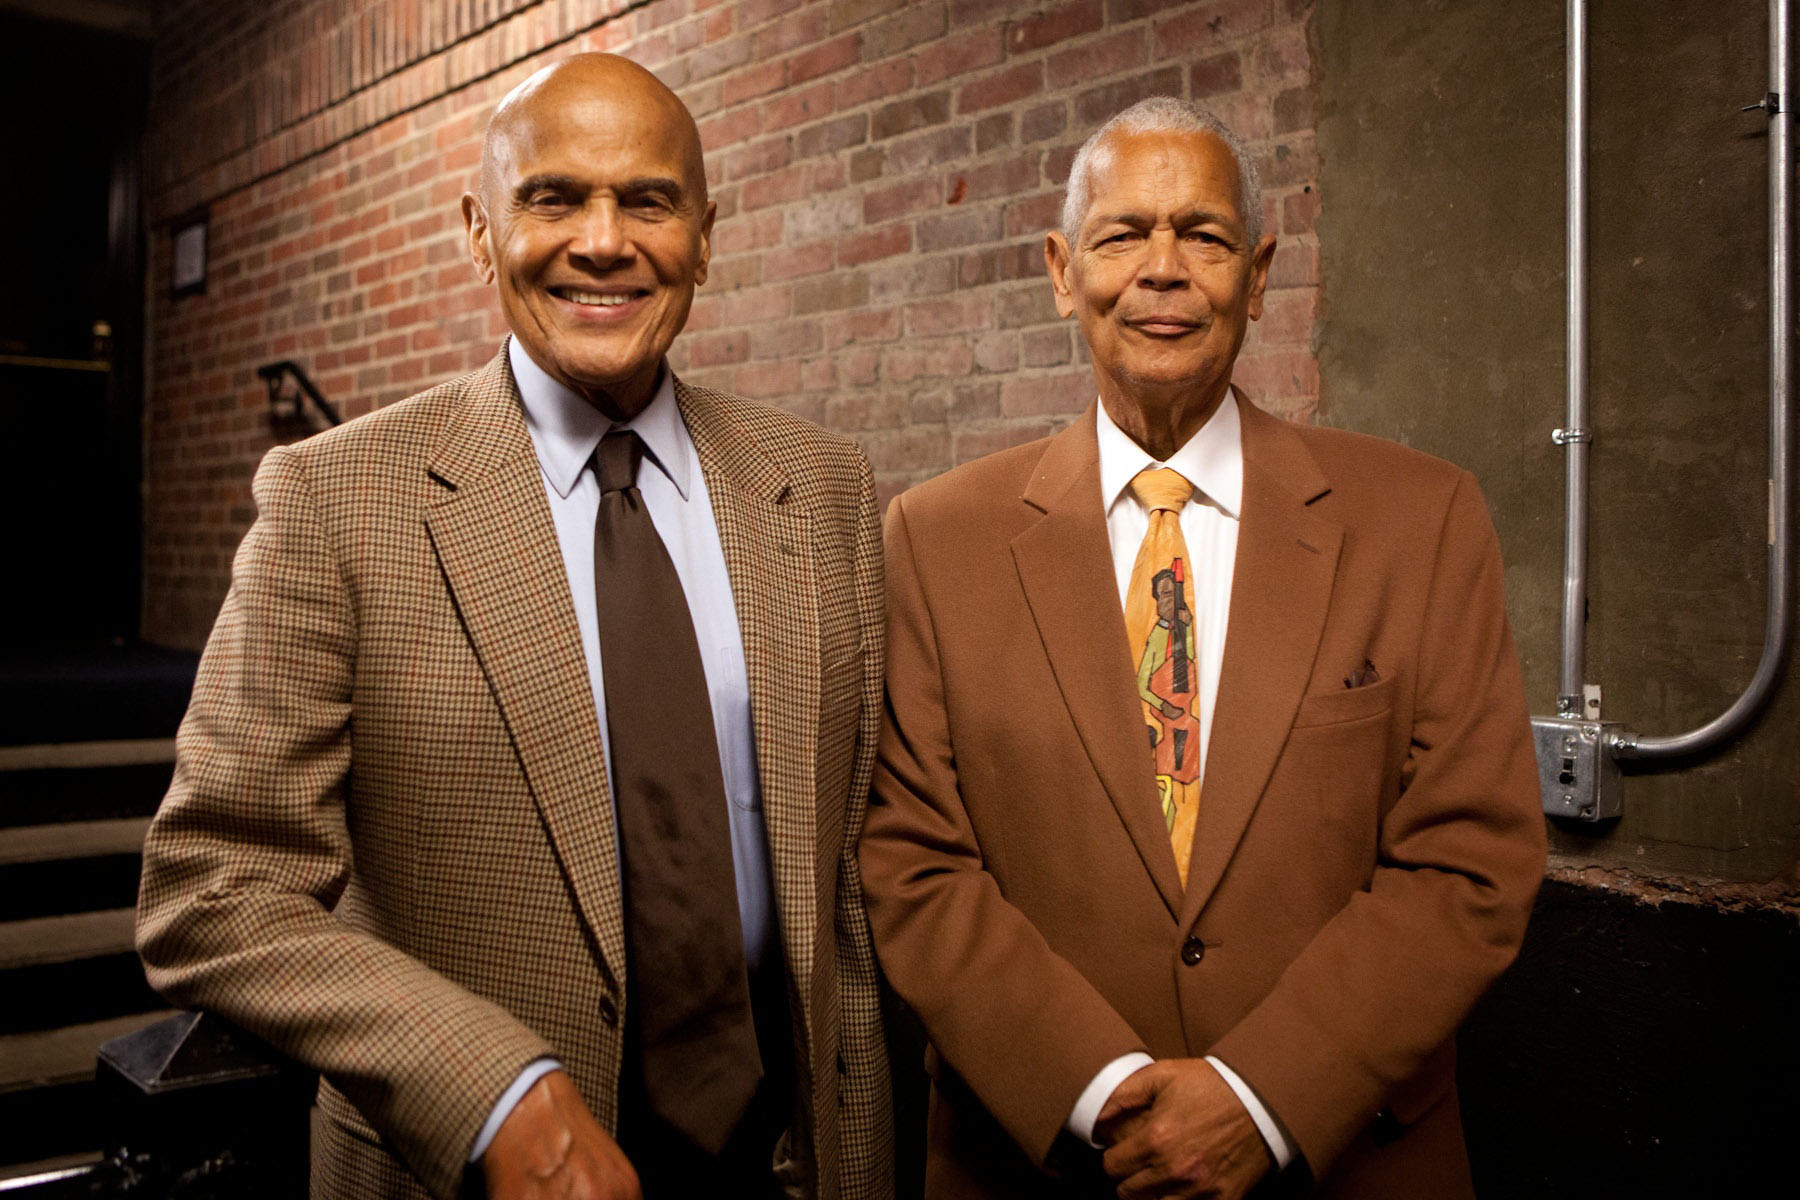  Harry Belafonte, left, and Julian Bond, right, stand together smiling at the camera